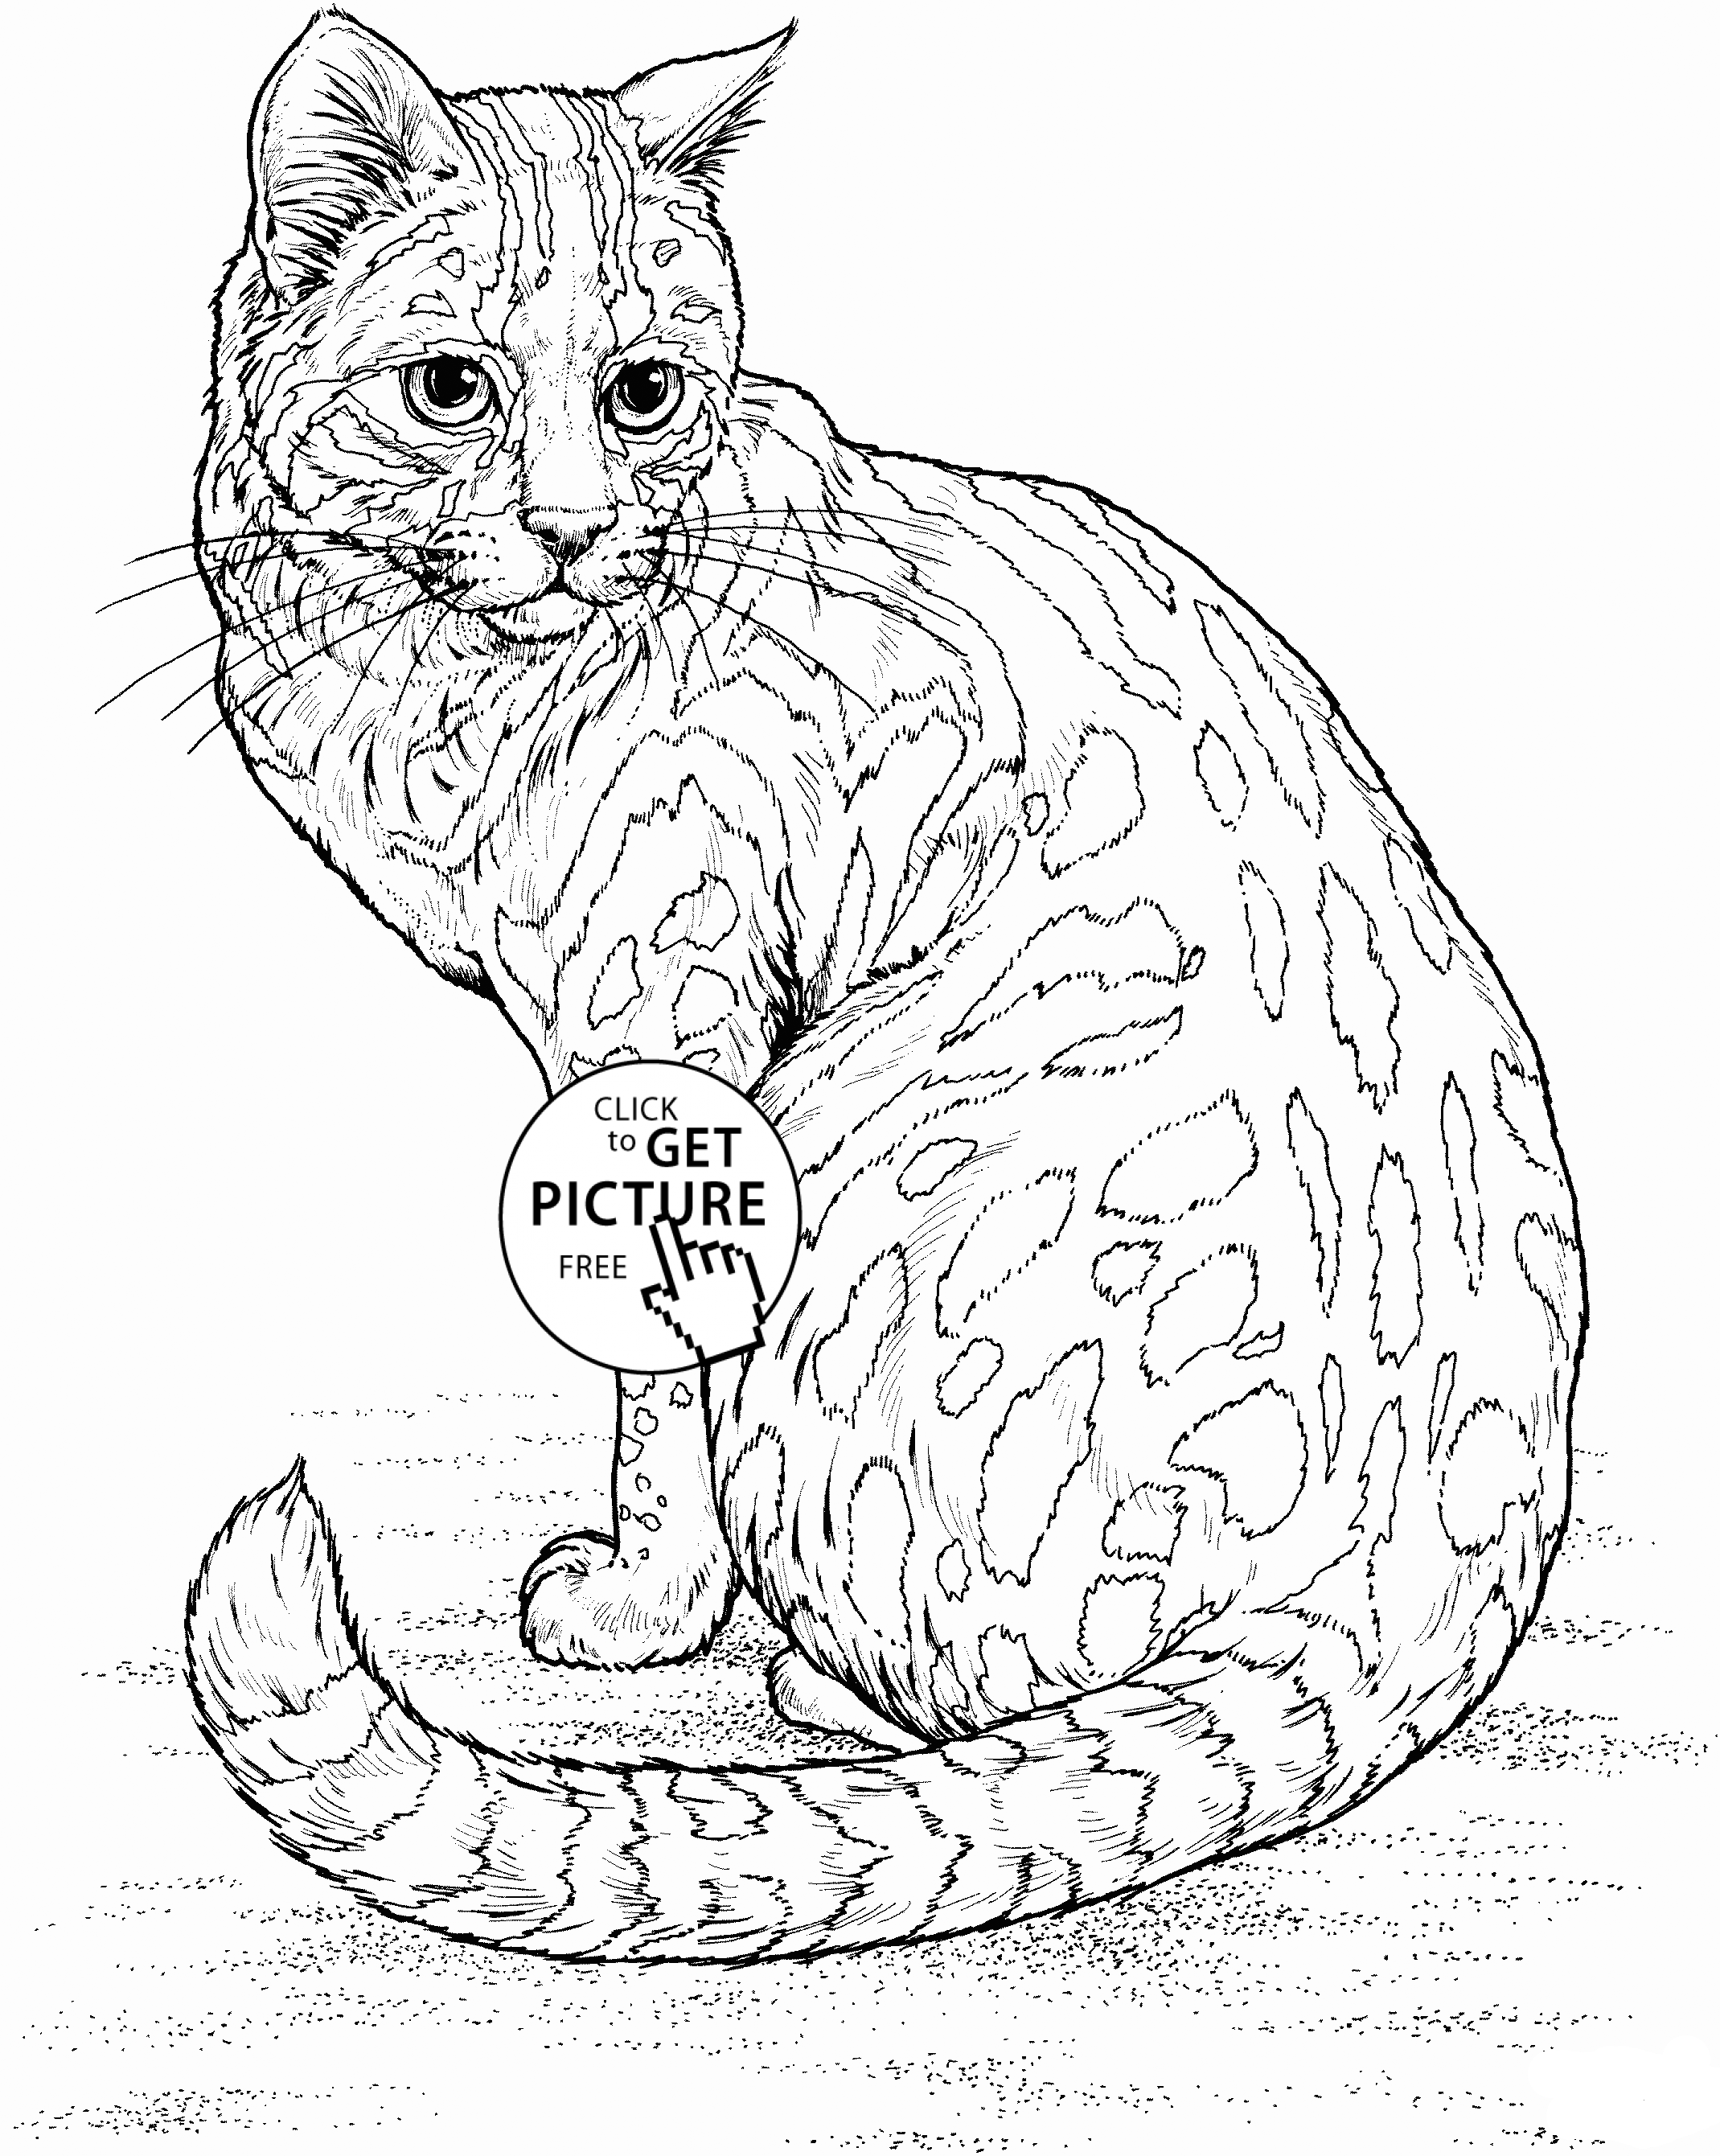 real animal coloring pages realistic cat coloring page for kids animal coloring pages coloring animal real 